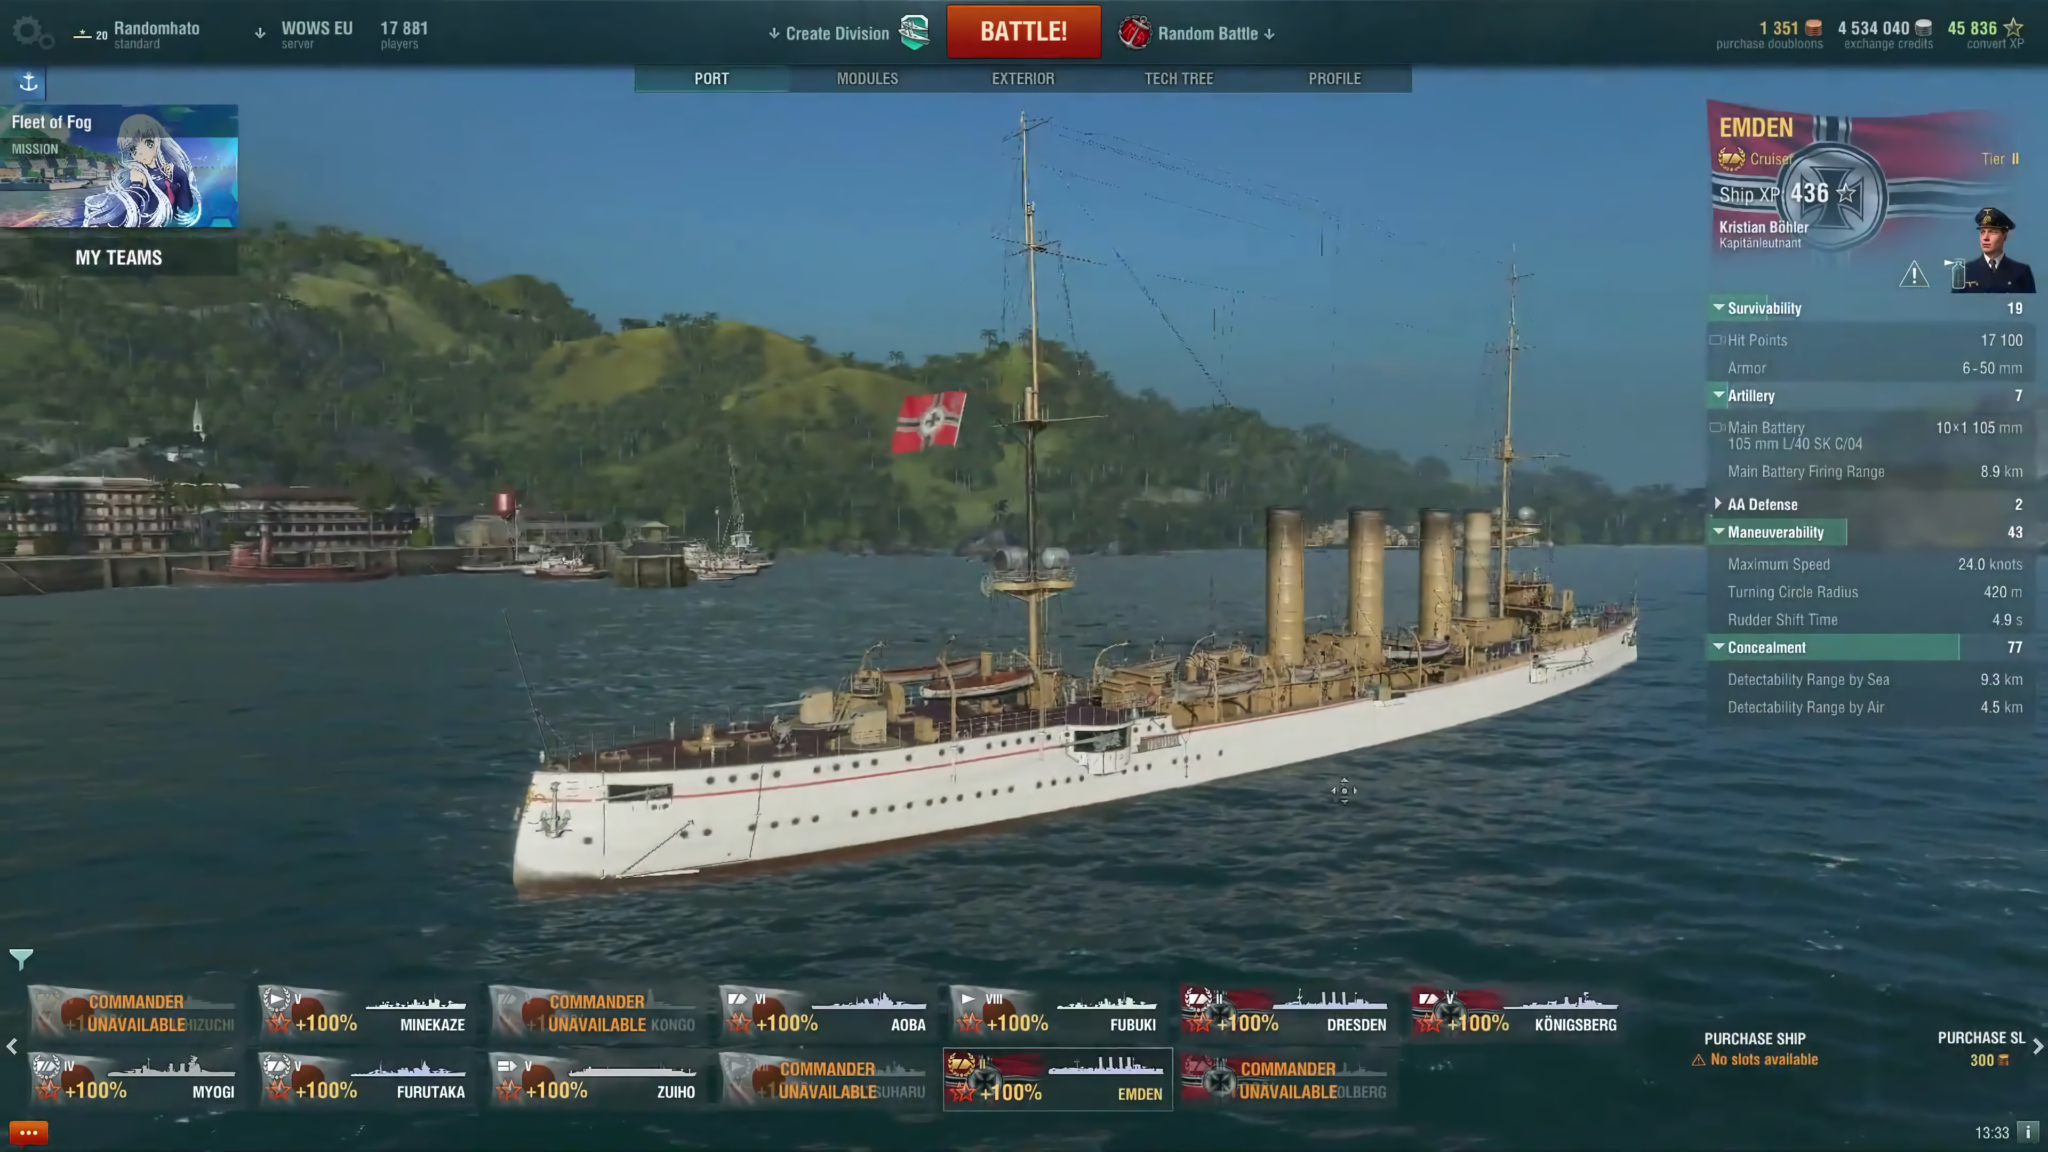 world of warships doubloons code